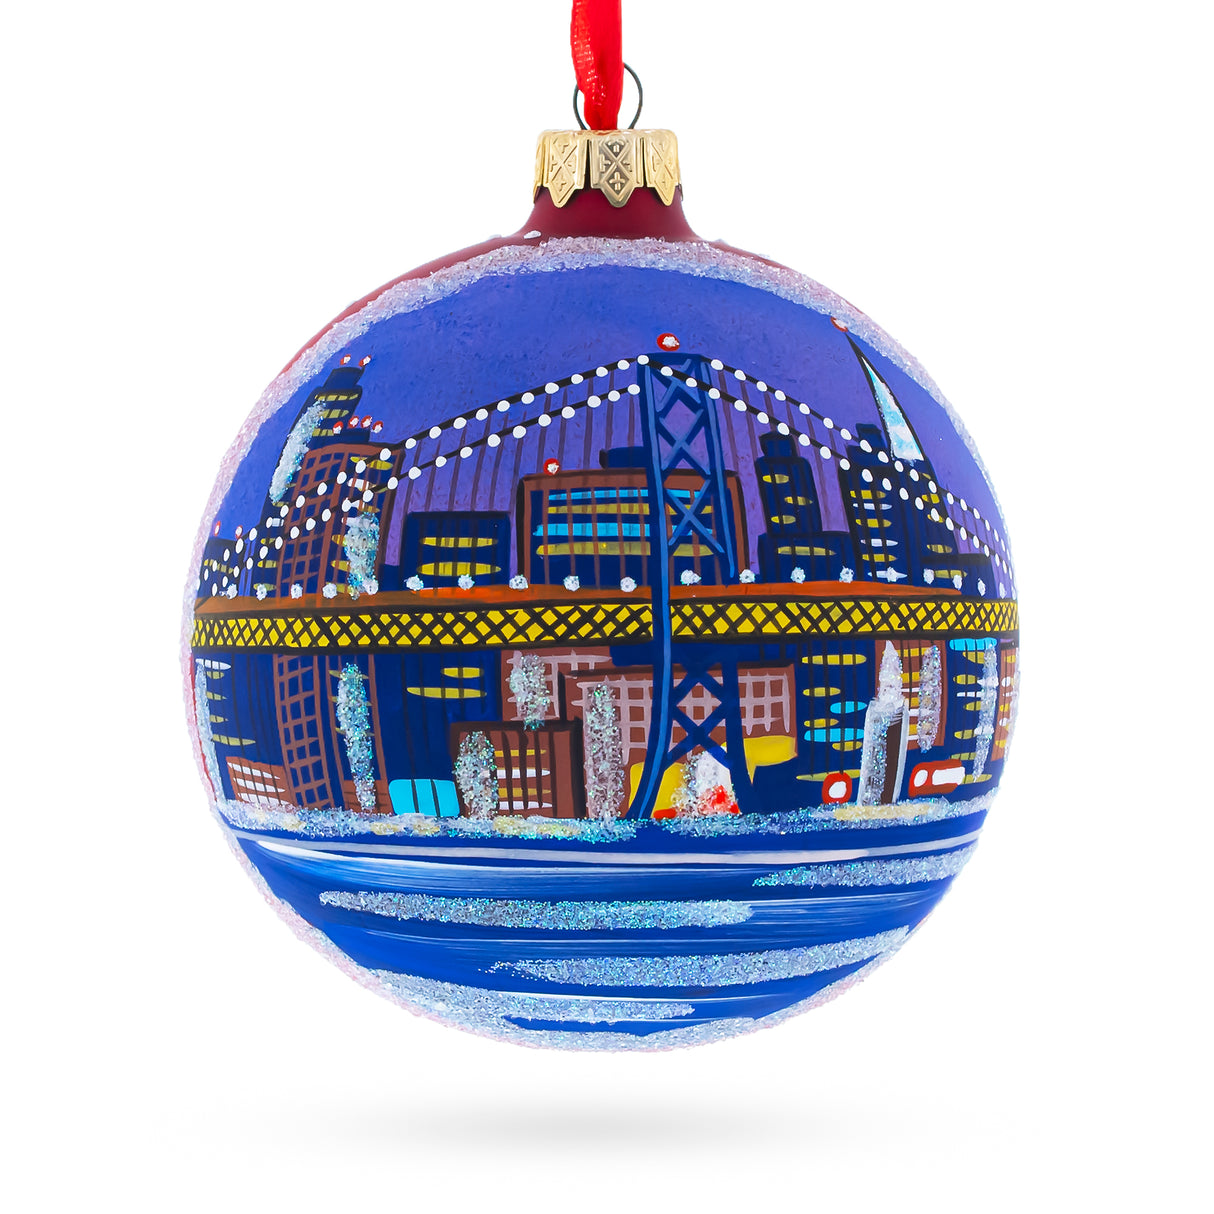 Glass San Francisco Golden Gate Bridge Glass Christmas Ornament 4 Inches in Blue color Round